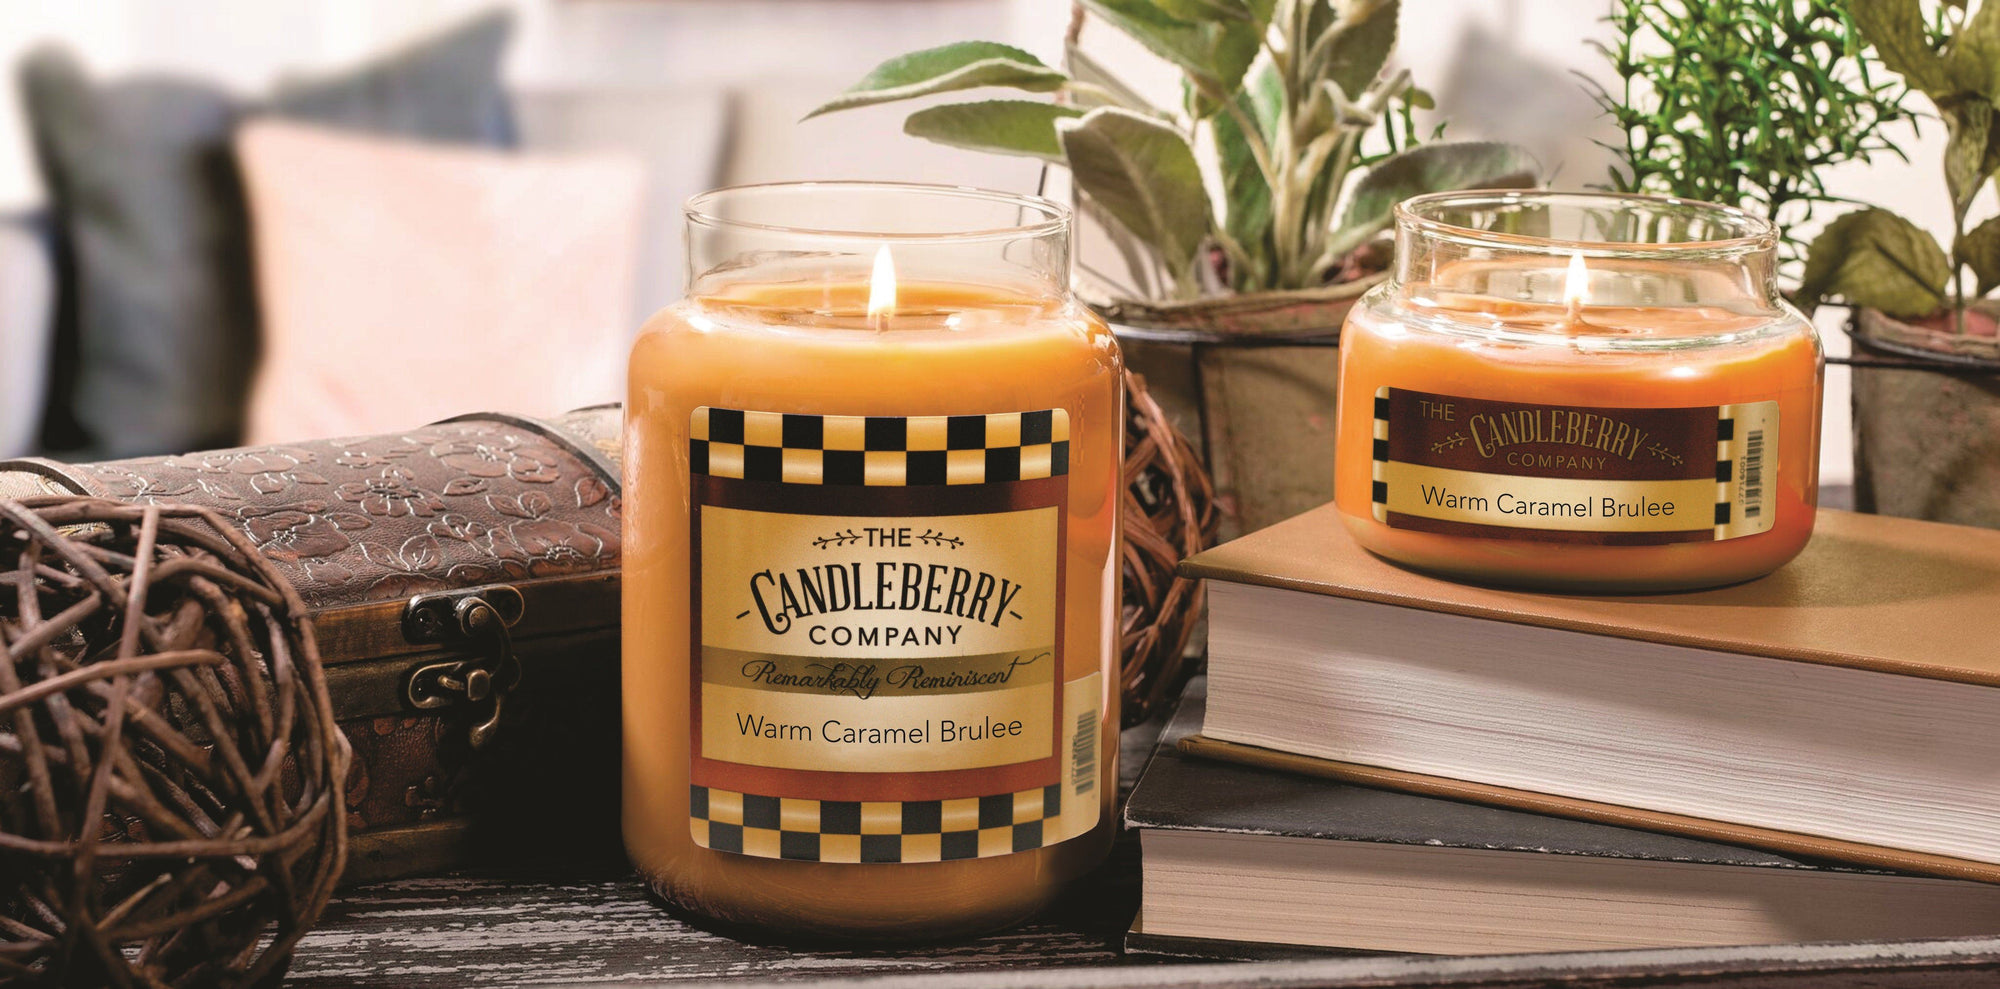 Warm Caramel Brulee™, 10 oz. Jar, Scented Candle 10 oz. Small Jar Candle The Candleberry Candle Company 